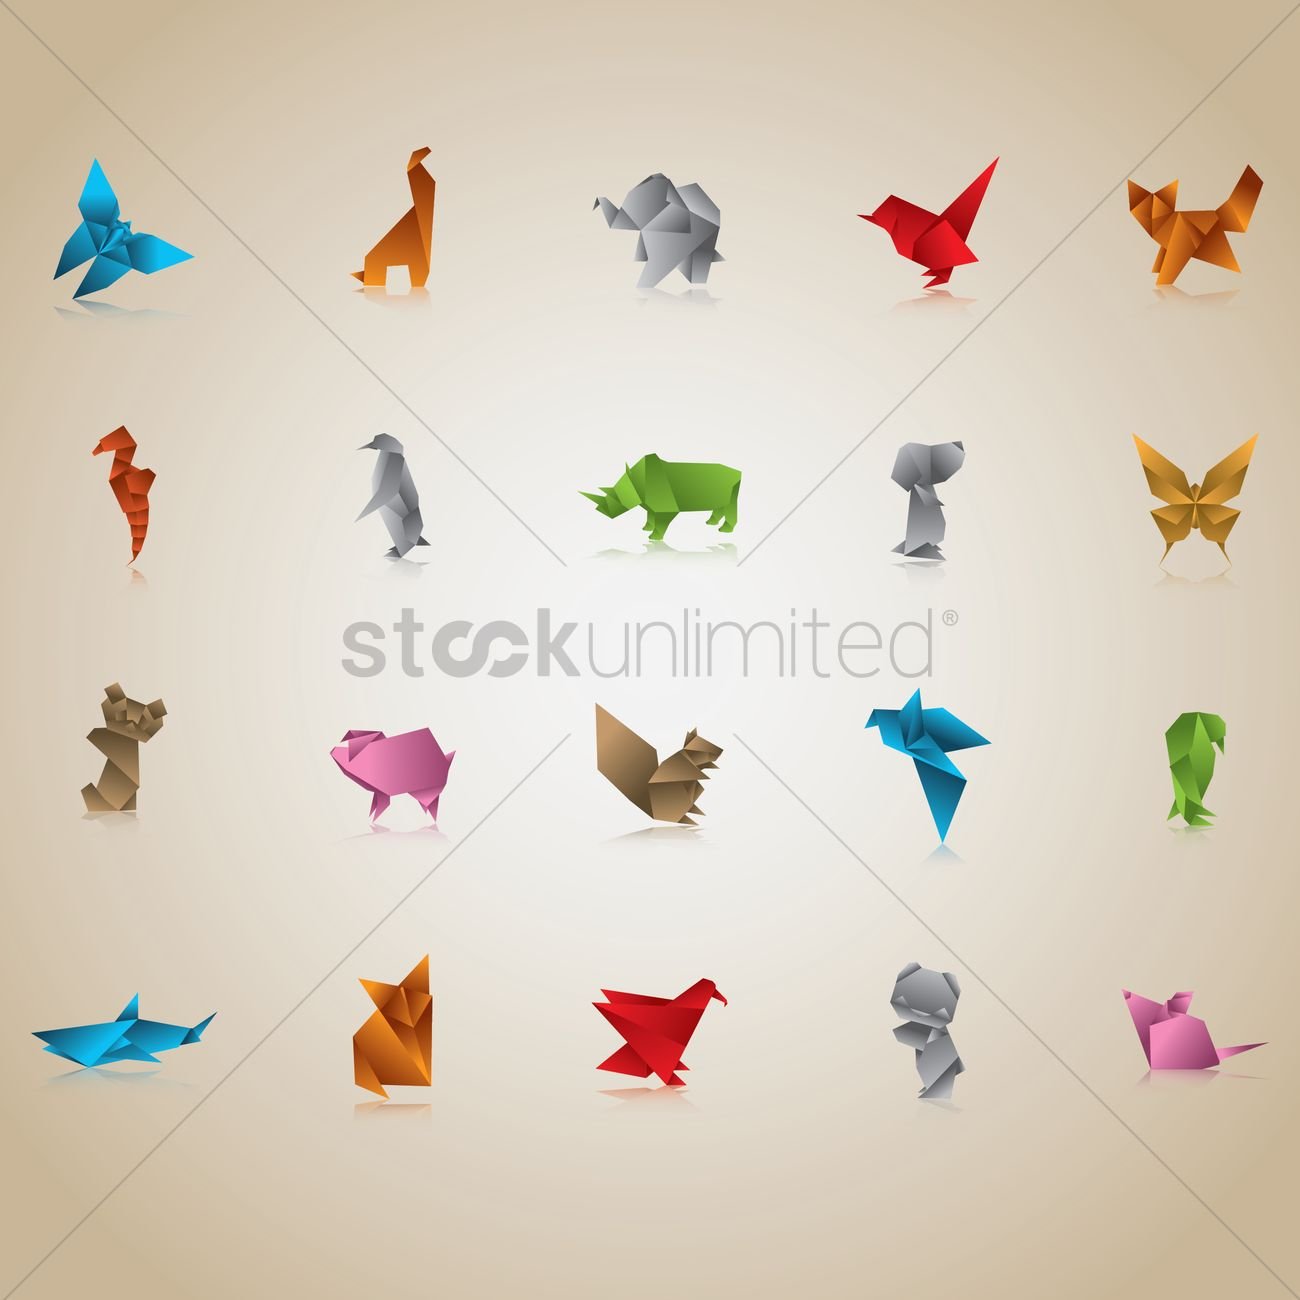 How To Design Origami Free Set Of Origami Animals And Birds Vector Image 1482084